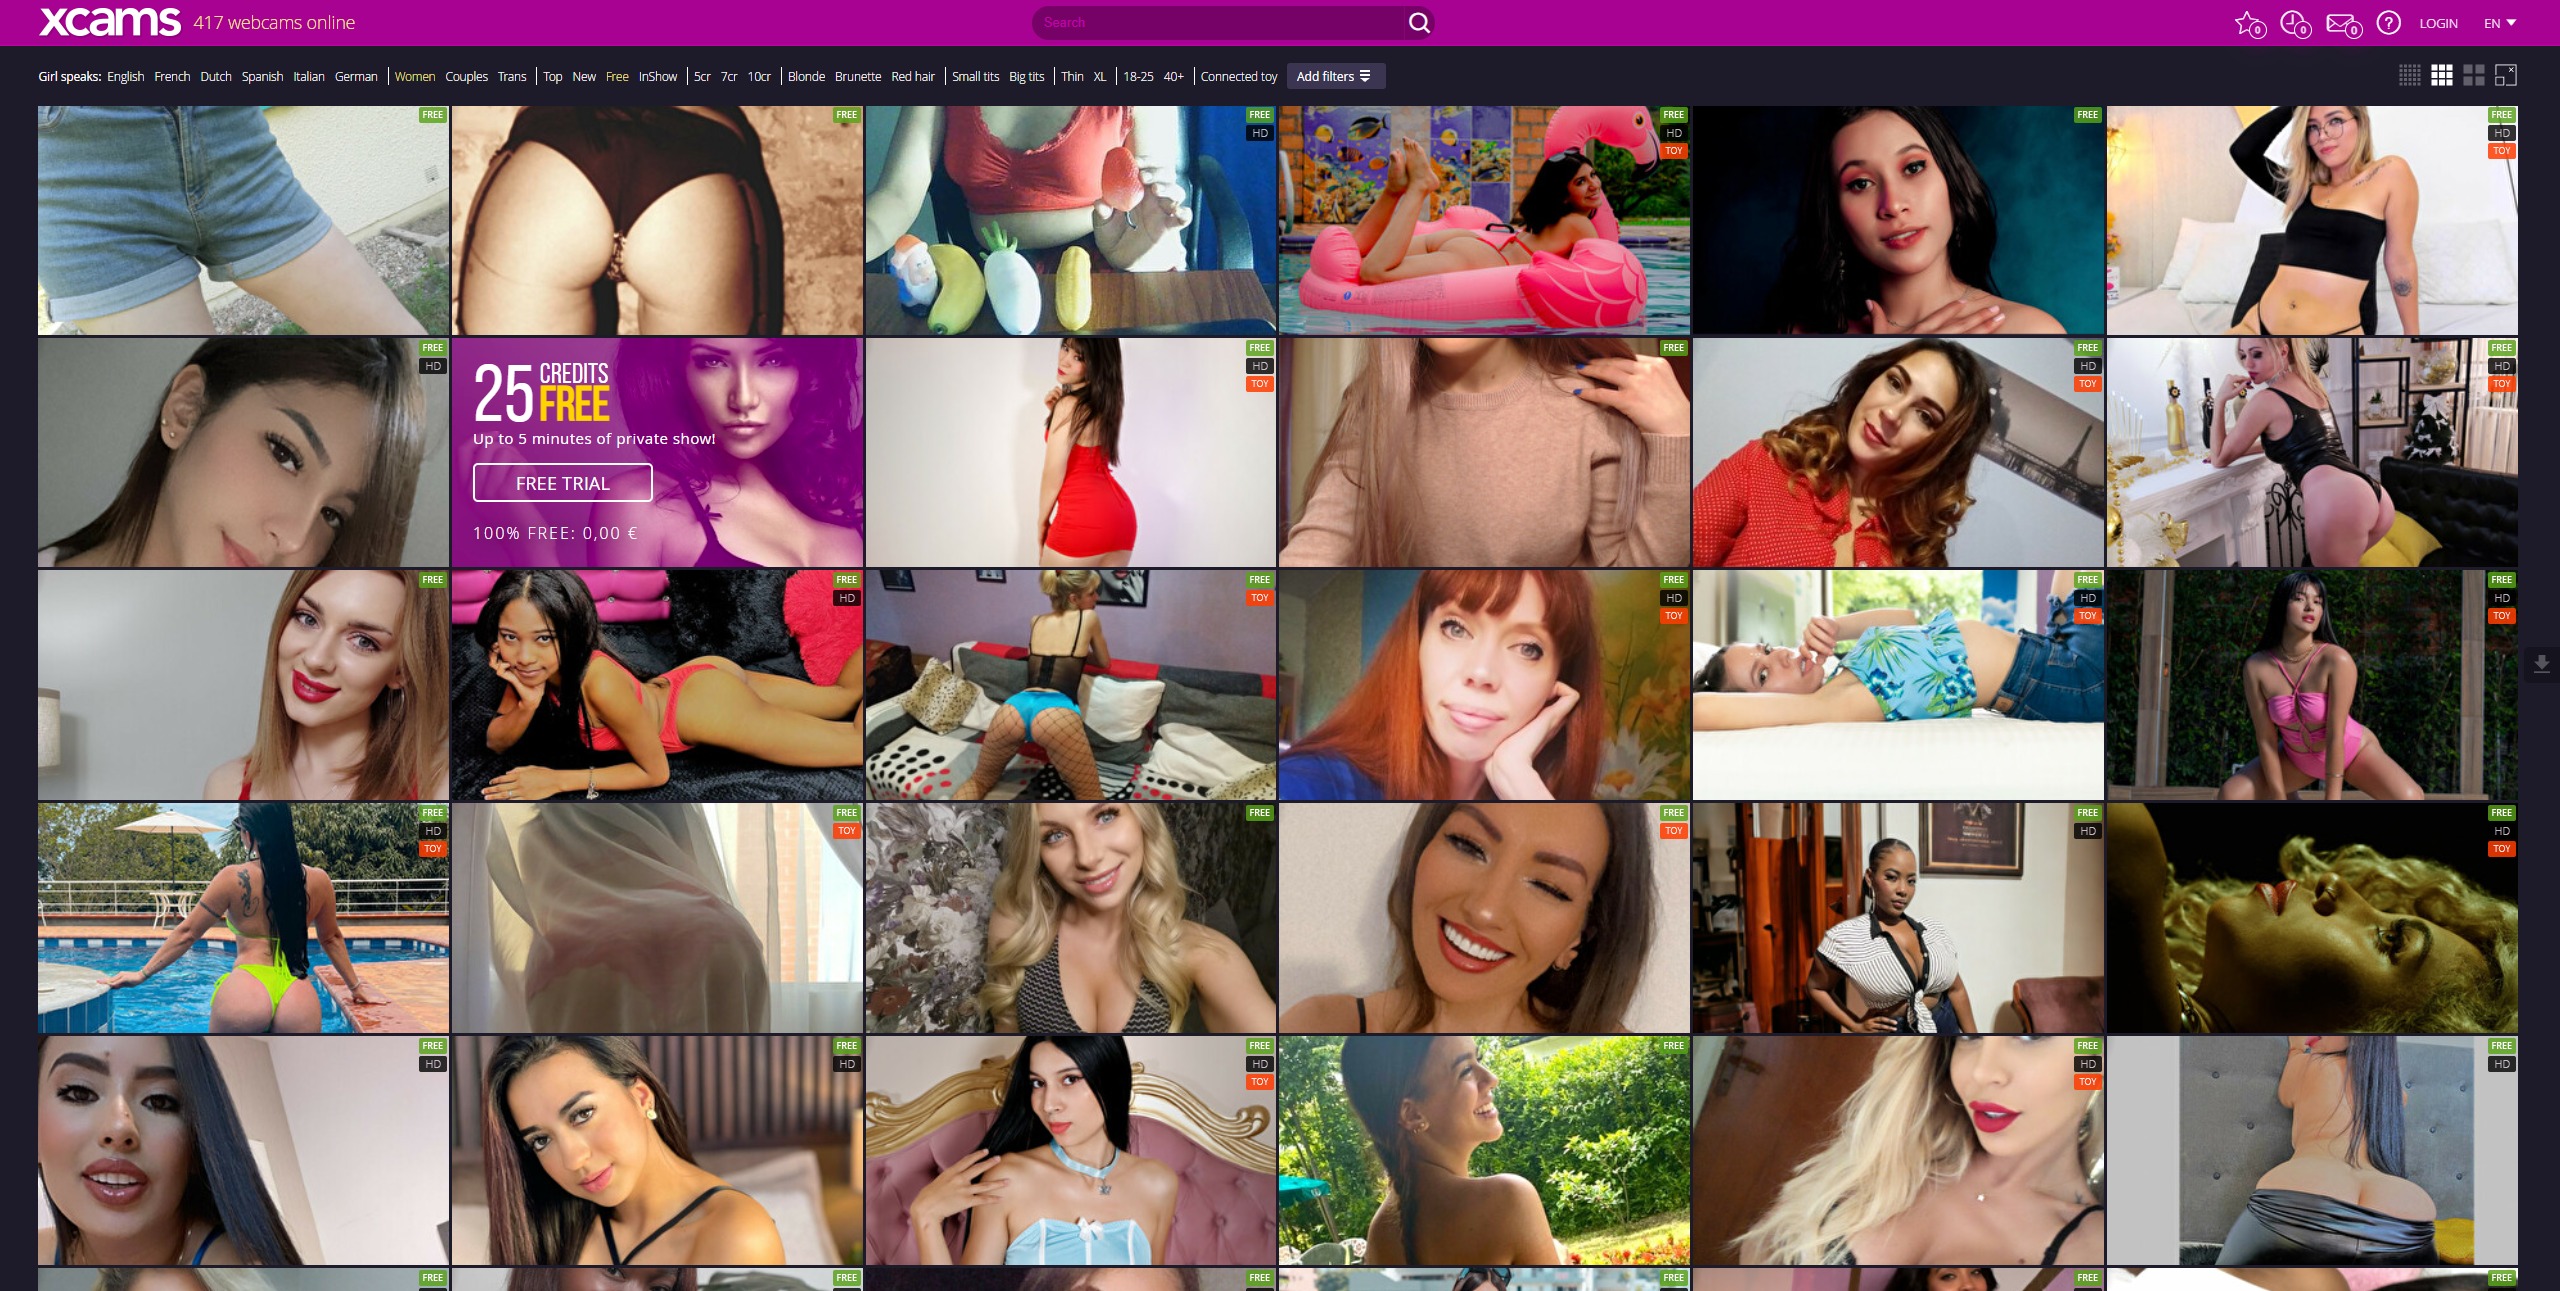 Xcams: Everything You Need to Know